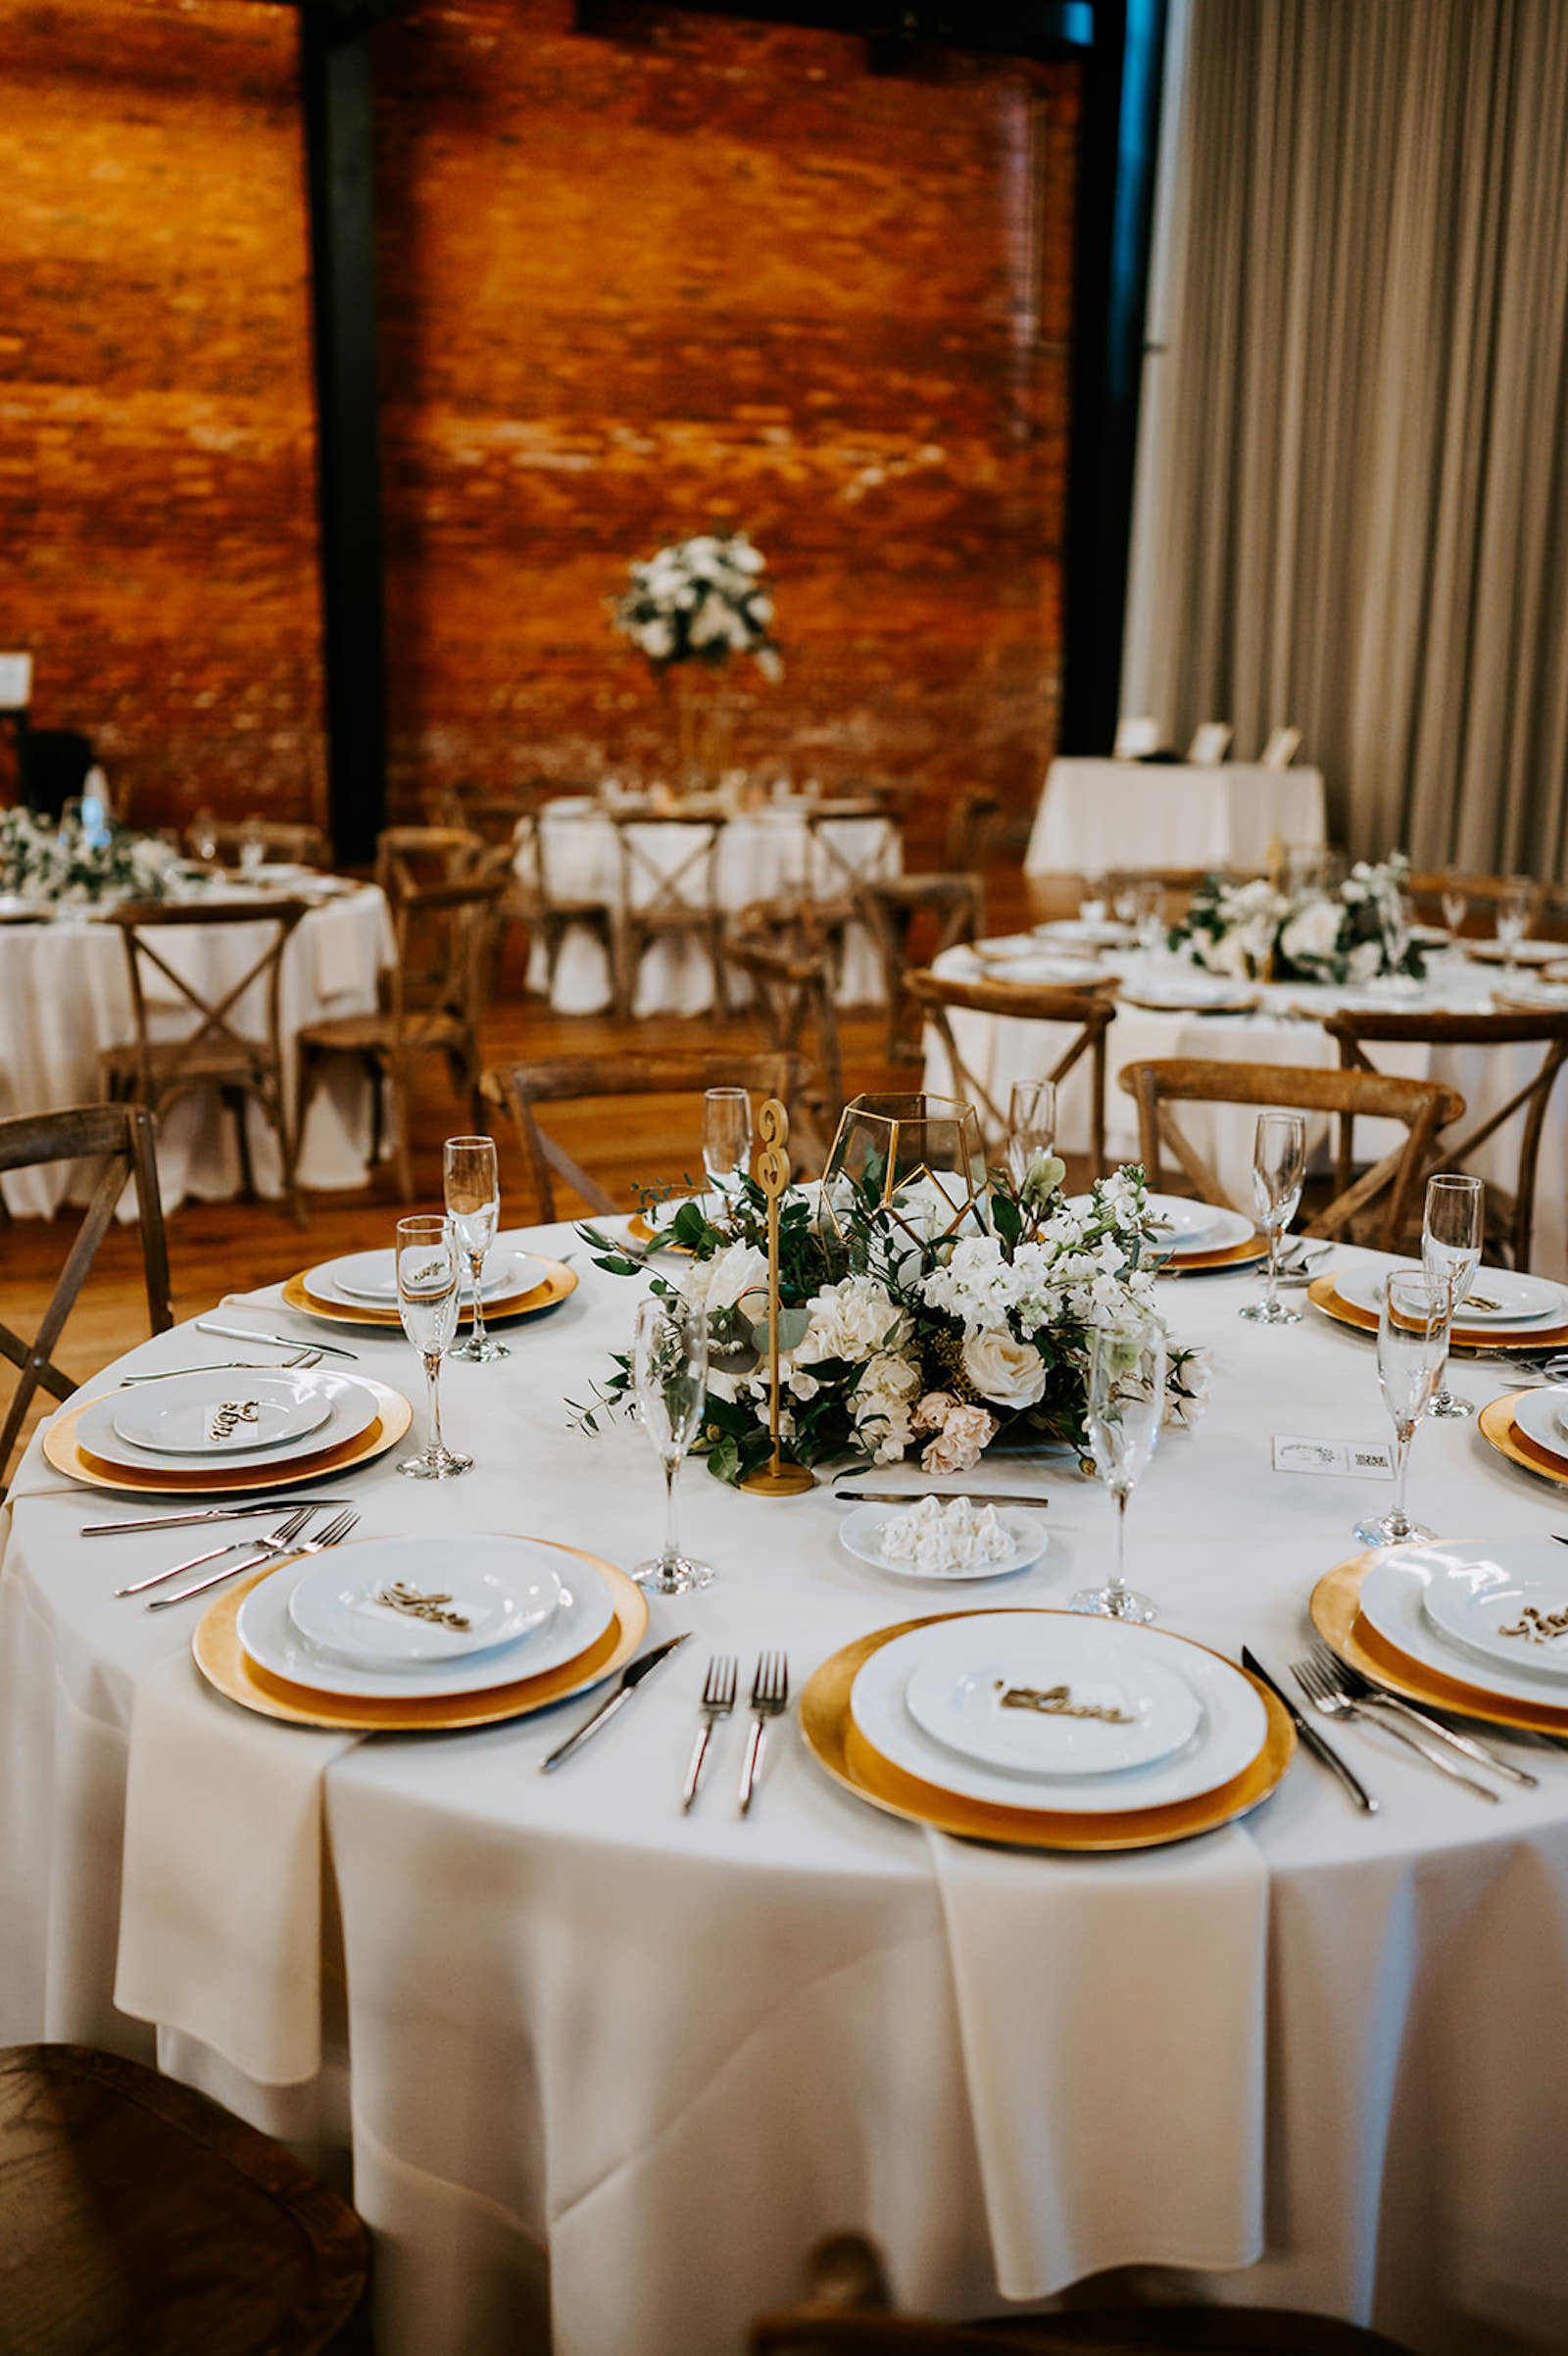 Classic Wedding Reception Table Setting Ideas | Gold Chargers | Roses, Snapdragons, Carnation Centerpiece Inspiration